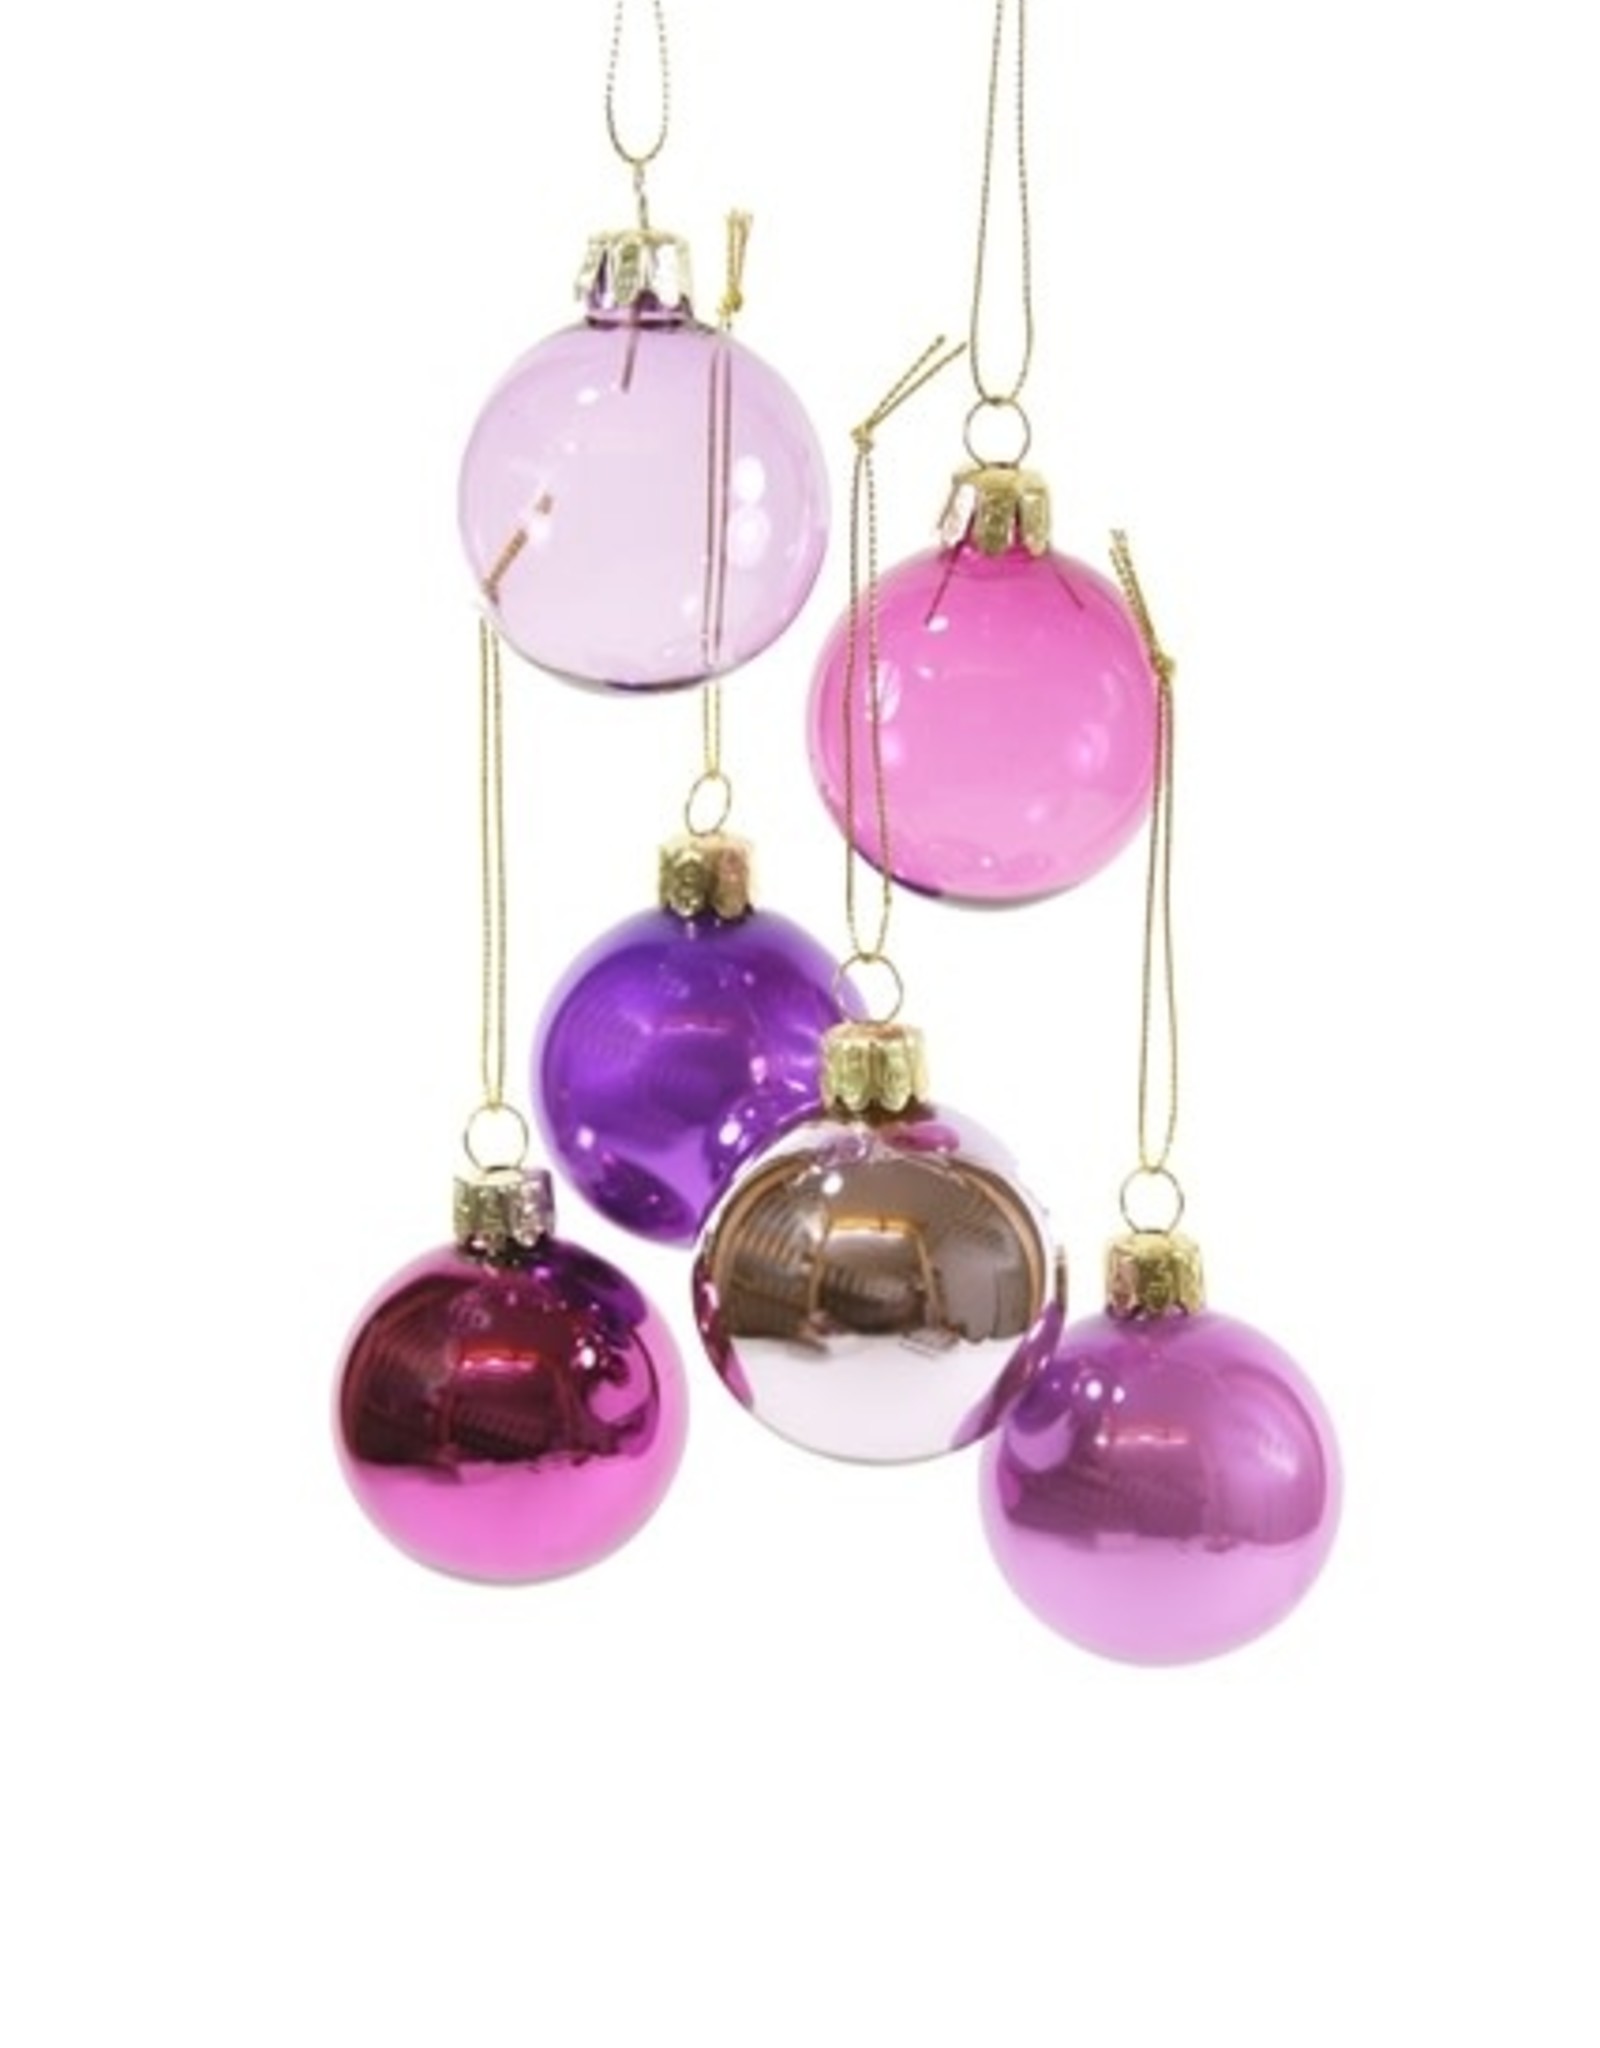 Cody Foster & Co. Small Grey Hue Ornament - 6 STYLES